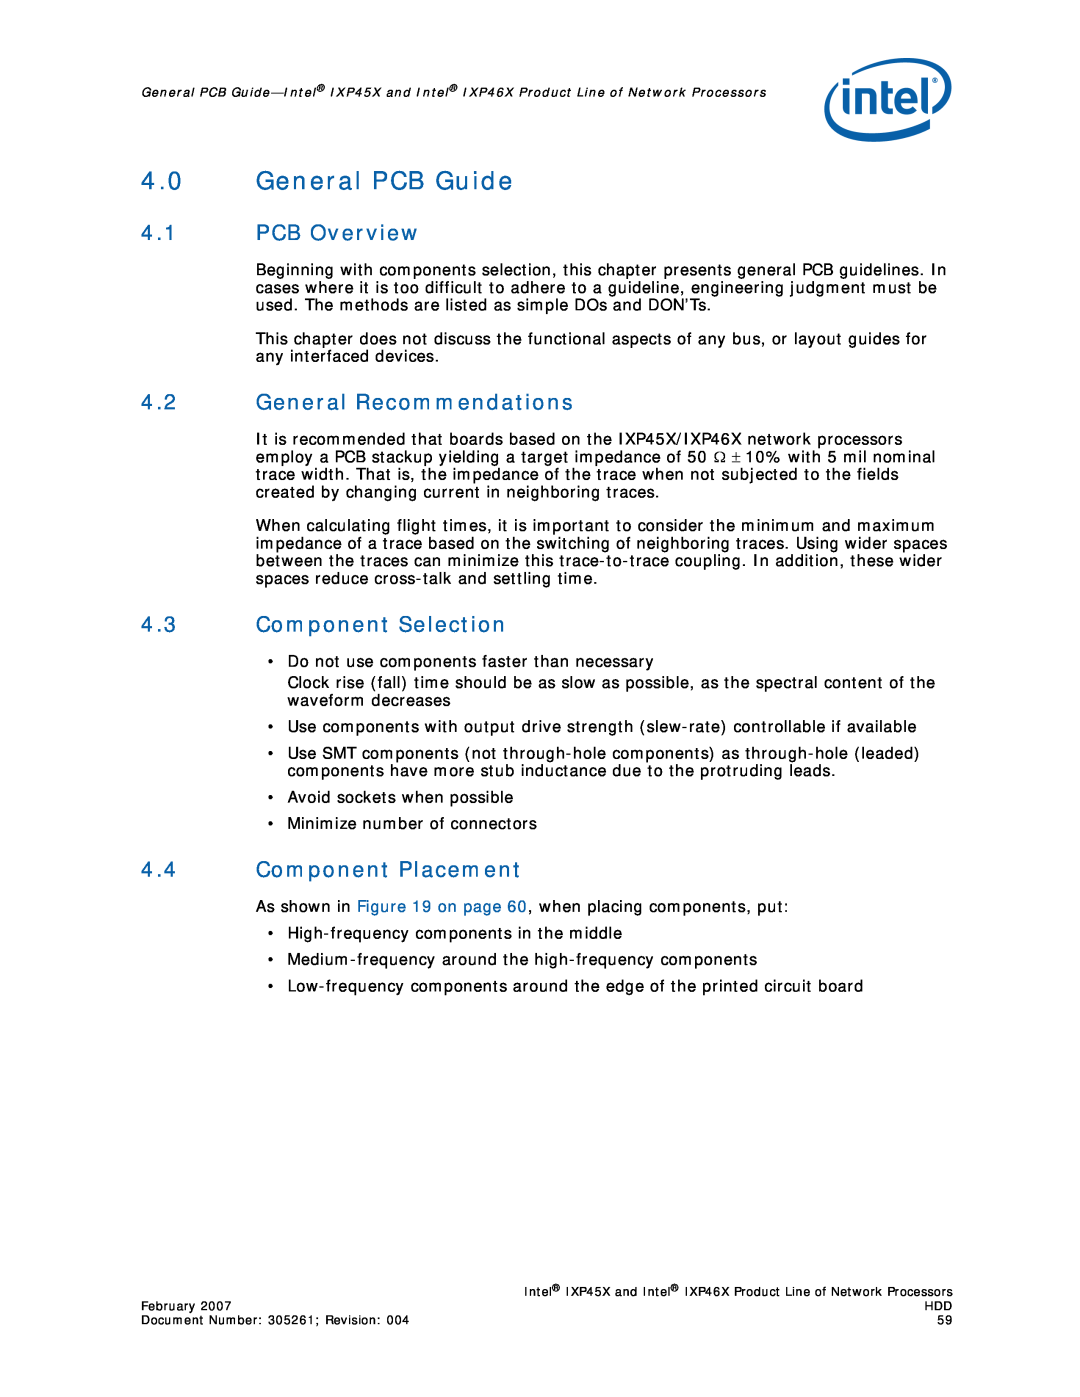 Intel IXP45X, IXP46X manual 4.0General PCB Guide, 4.1PCB Overview, 4.2General Recommendations, 4.3Component Selection 